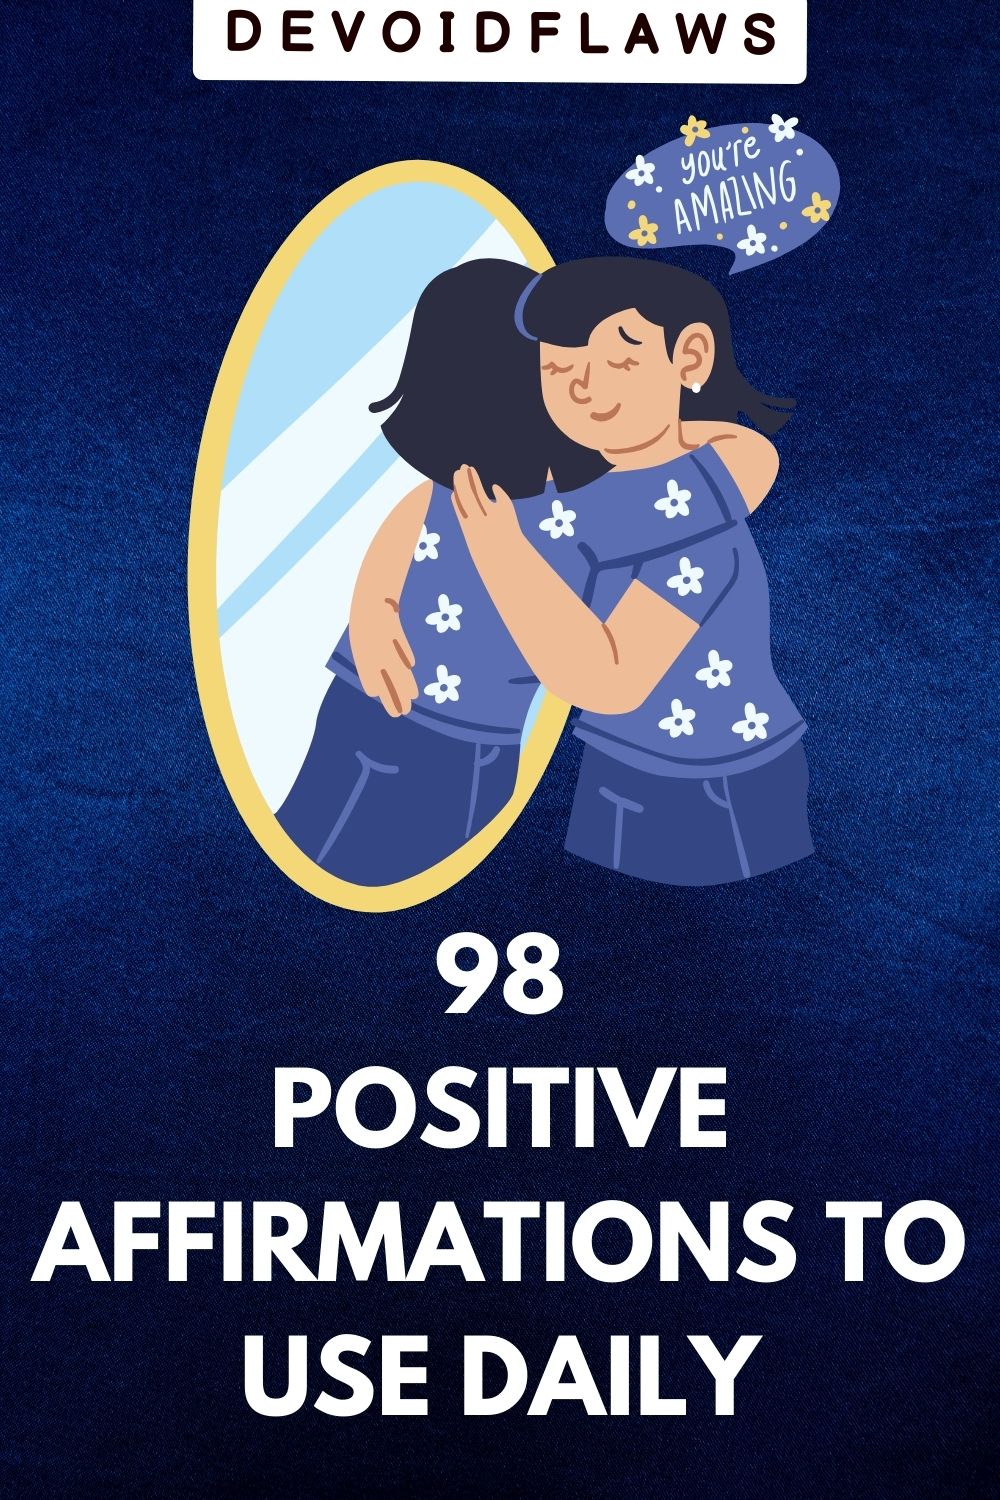 blue background image with text - 98 positive affirmations to use daily